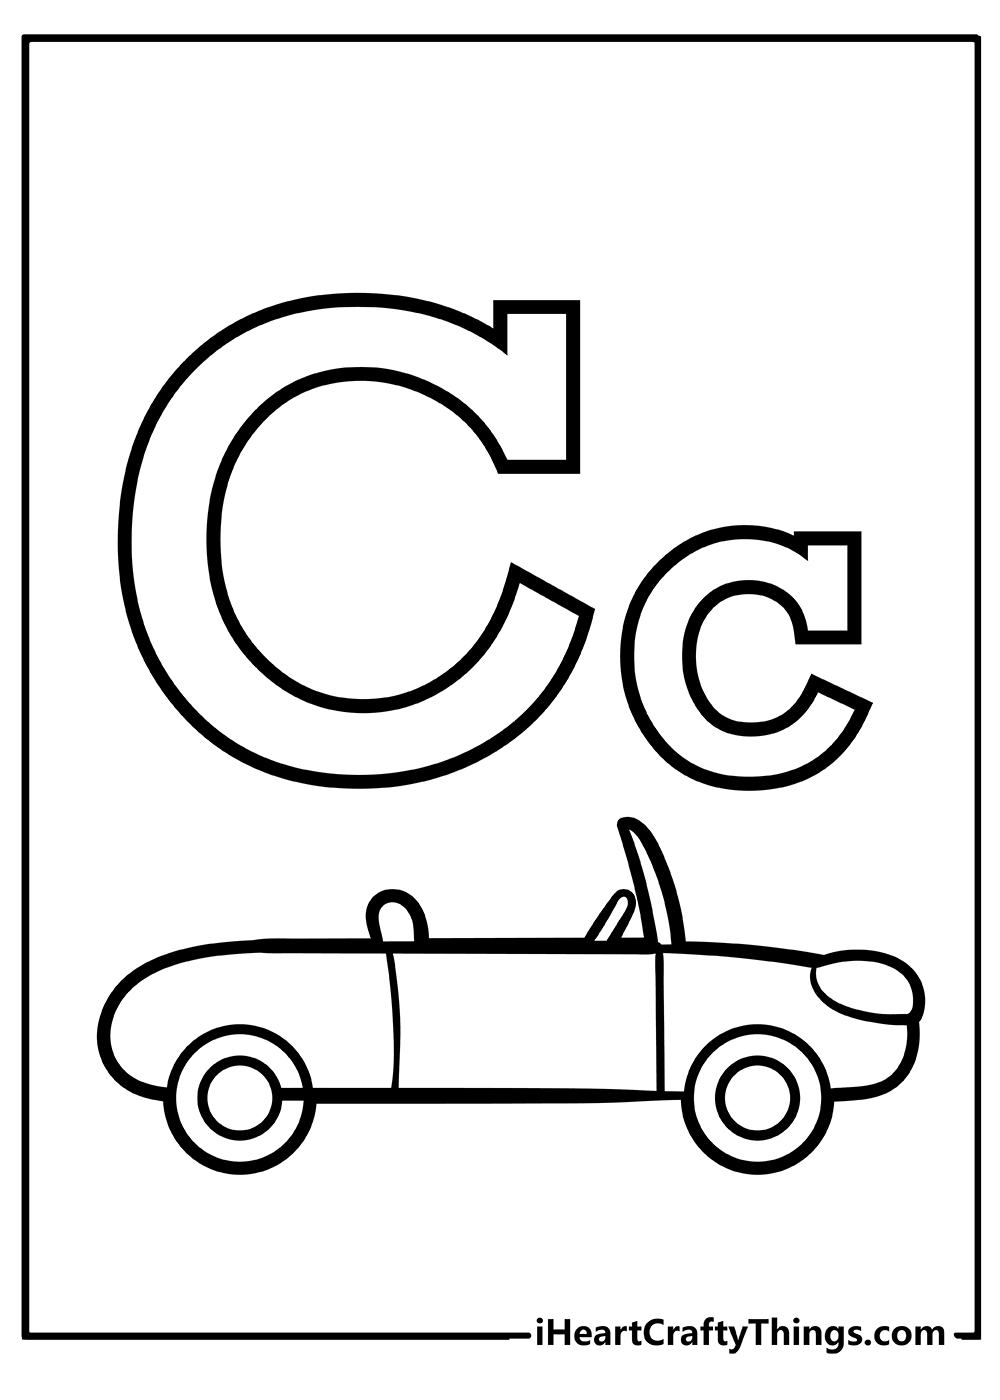 Letter C Coloring Pages for kids free download